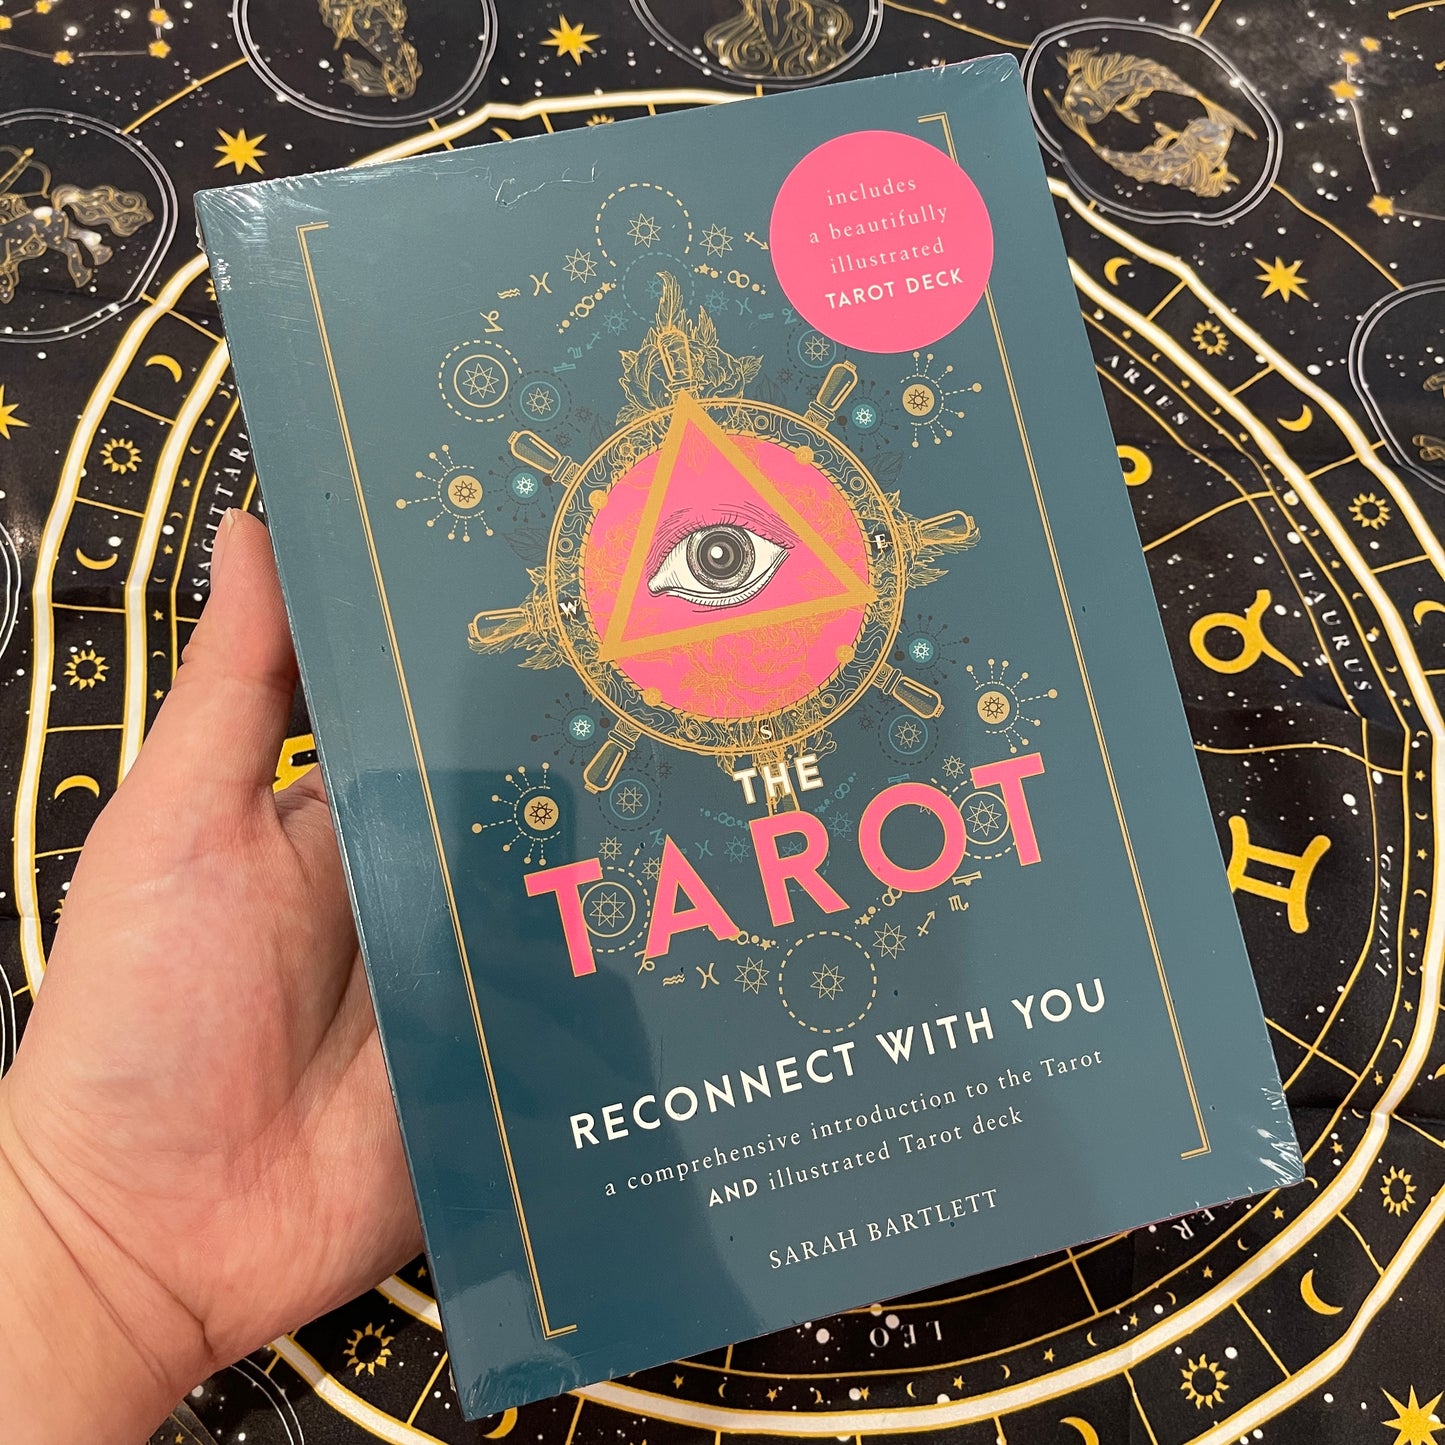 The Tarot Book and Card Deck: Reconnect With You: A Comprehensive Introduction to the Tarot with an illustrated Tarot deck